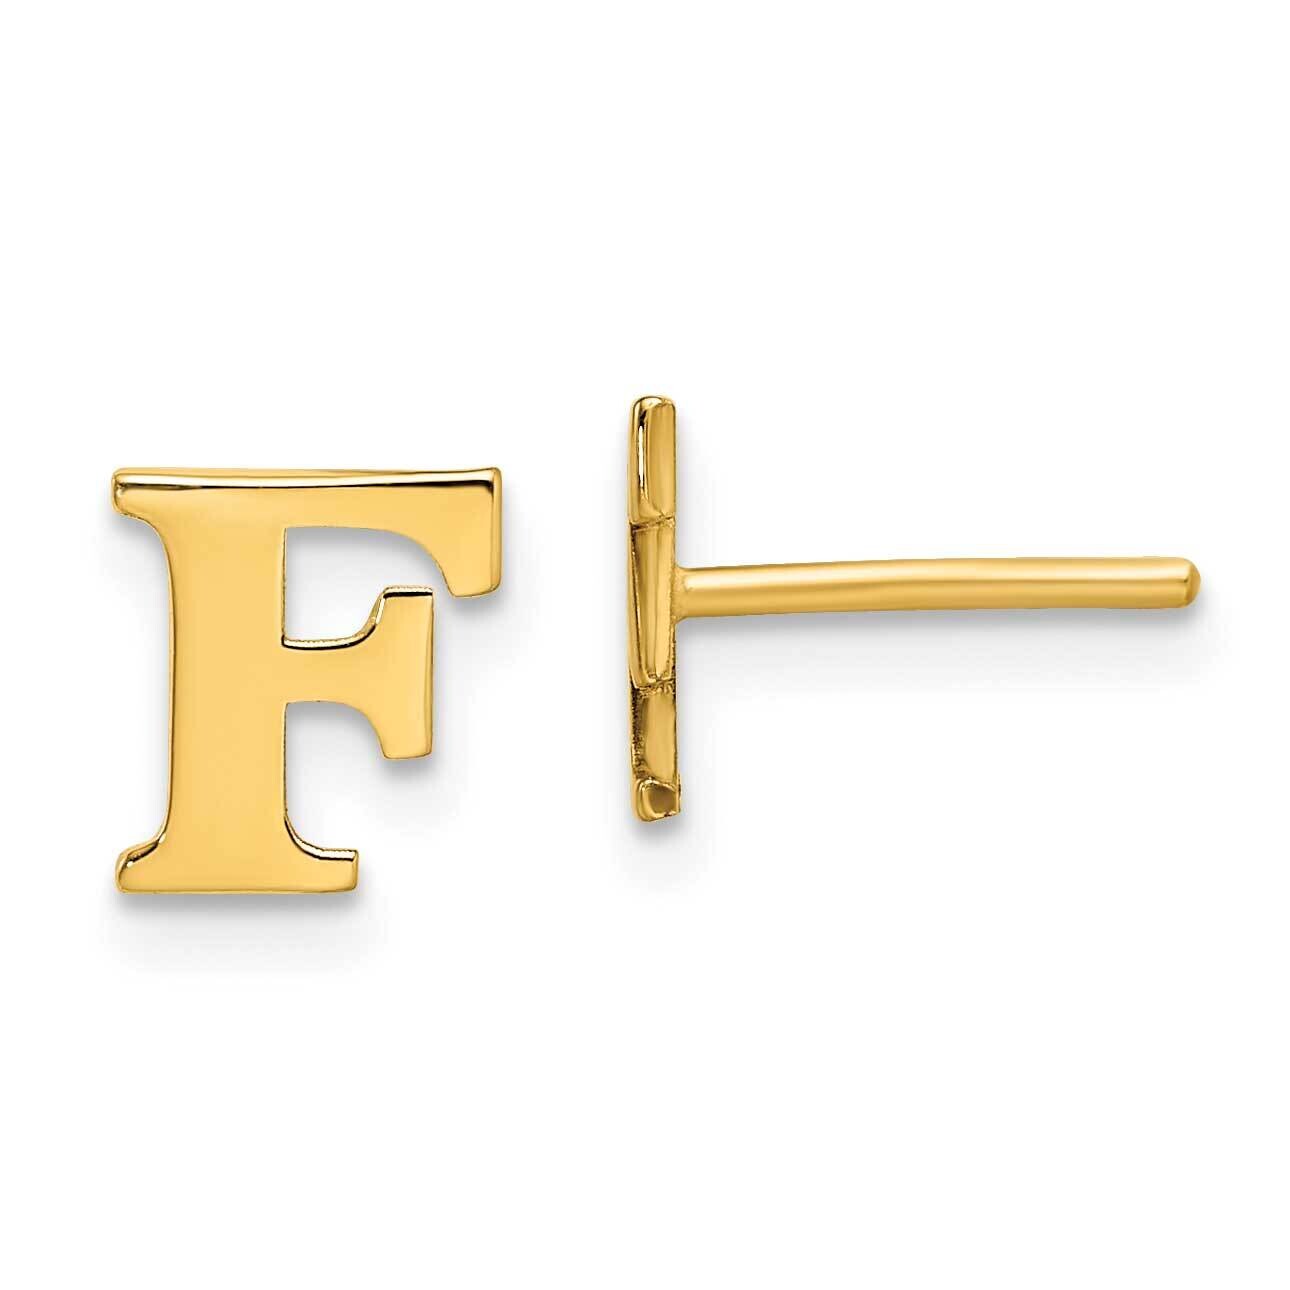 Gold-Plated Letter F Initial Post Earrings Sterling Silver XNE46GP/F